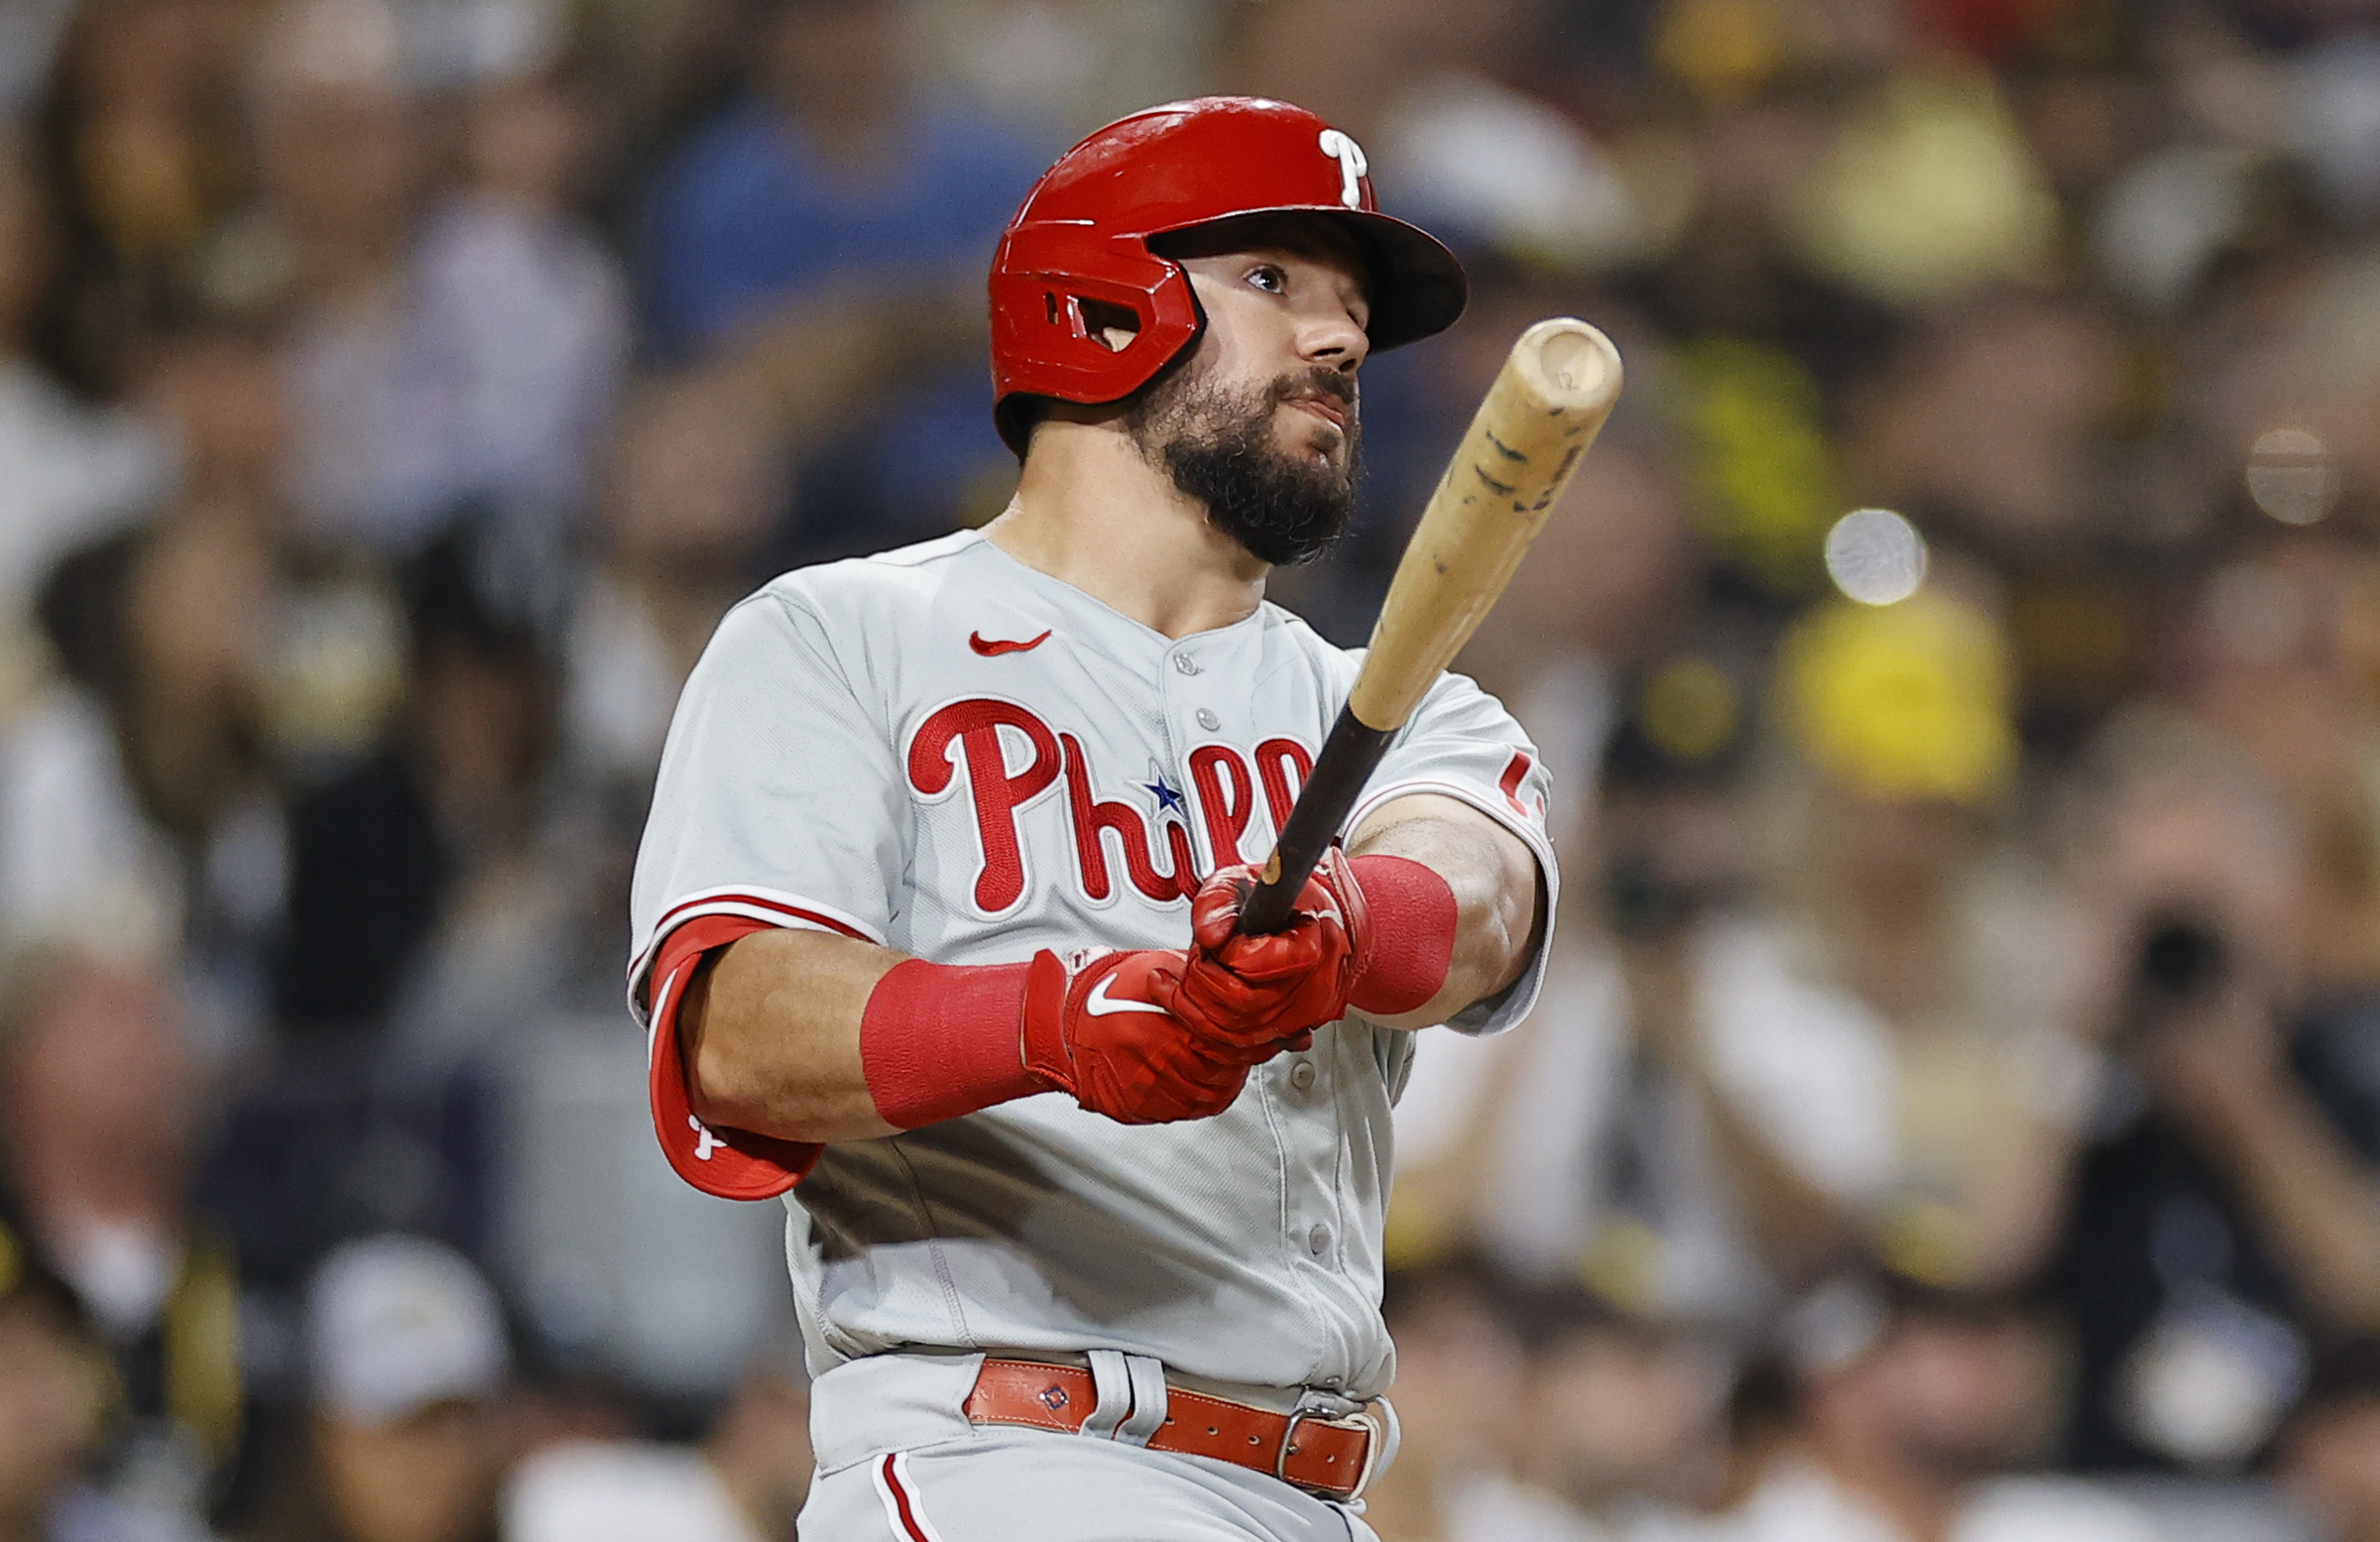 Phillies news and rumors 9/22: José Alvarado saying 'good luck' to hitters  once again  Phillies Nation - Your source for Philadelphia Phillies news,  opinion, history, rumors, events, and other fun stuff.